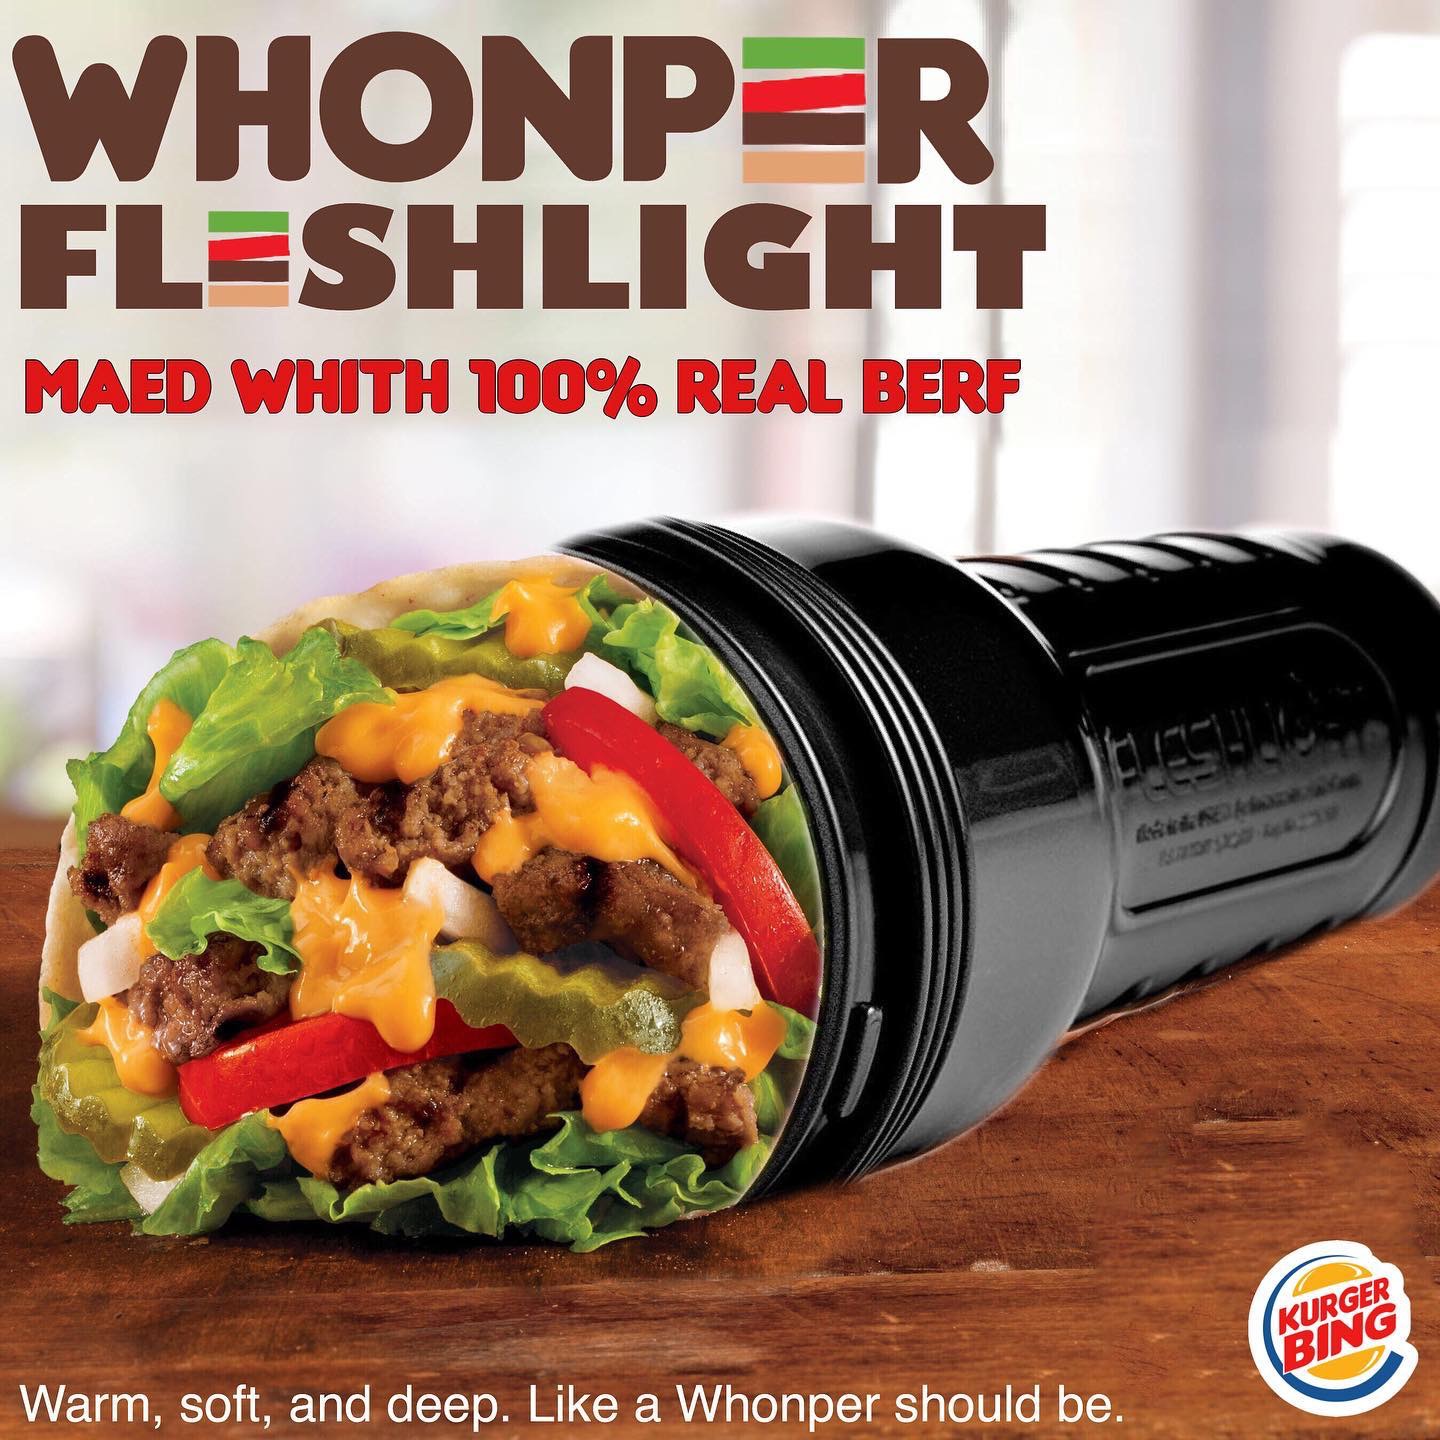 burger king whopper burrito - Whonper Fleshlight Maed Whith 100% Real Berf Warm, soft, and deep. a Whonper should be.